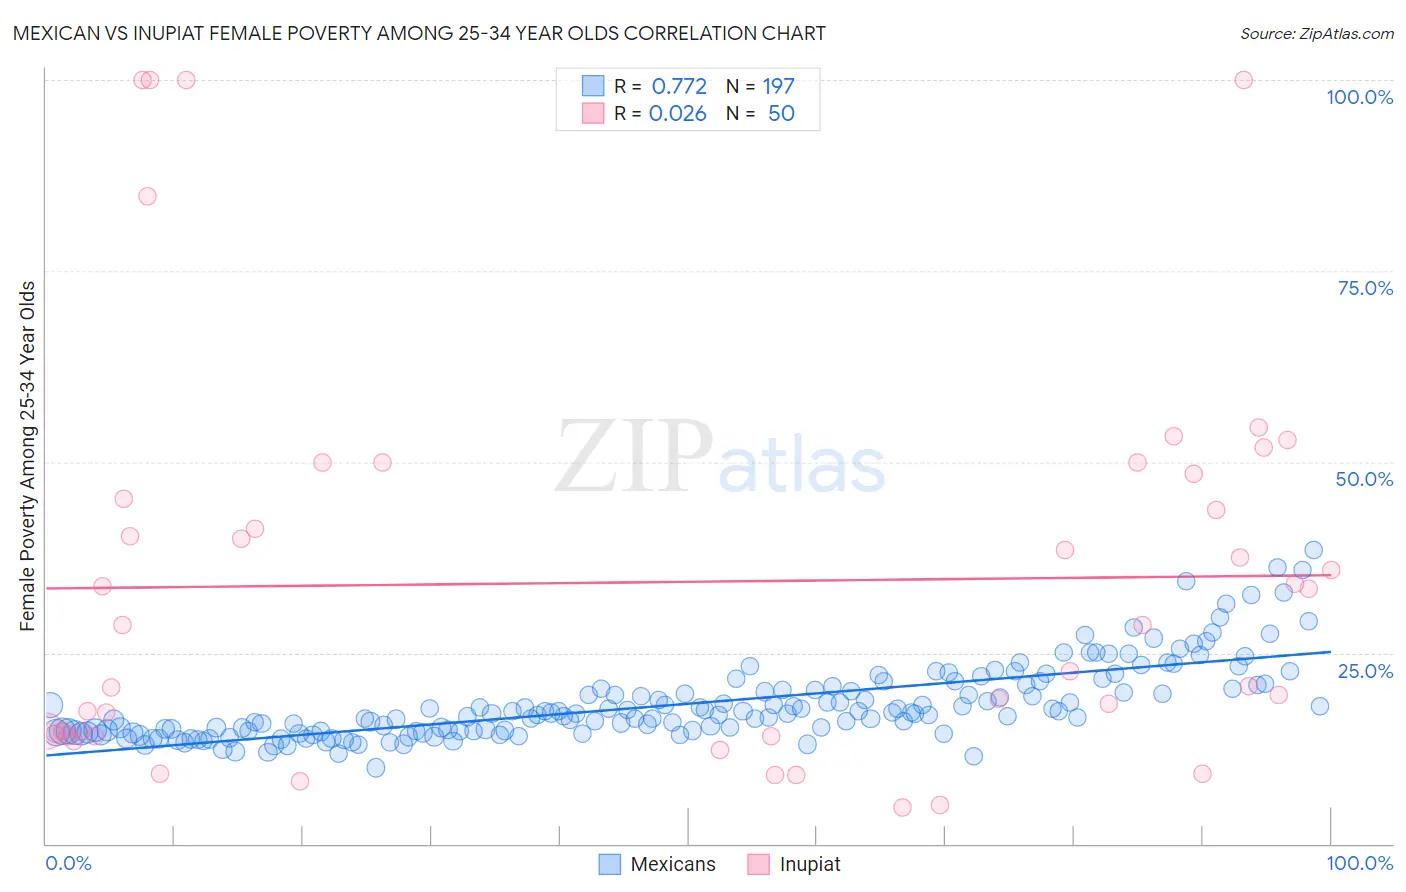 Mexican vs Inupiat Female Poverty Among 25-34 Year Olds